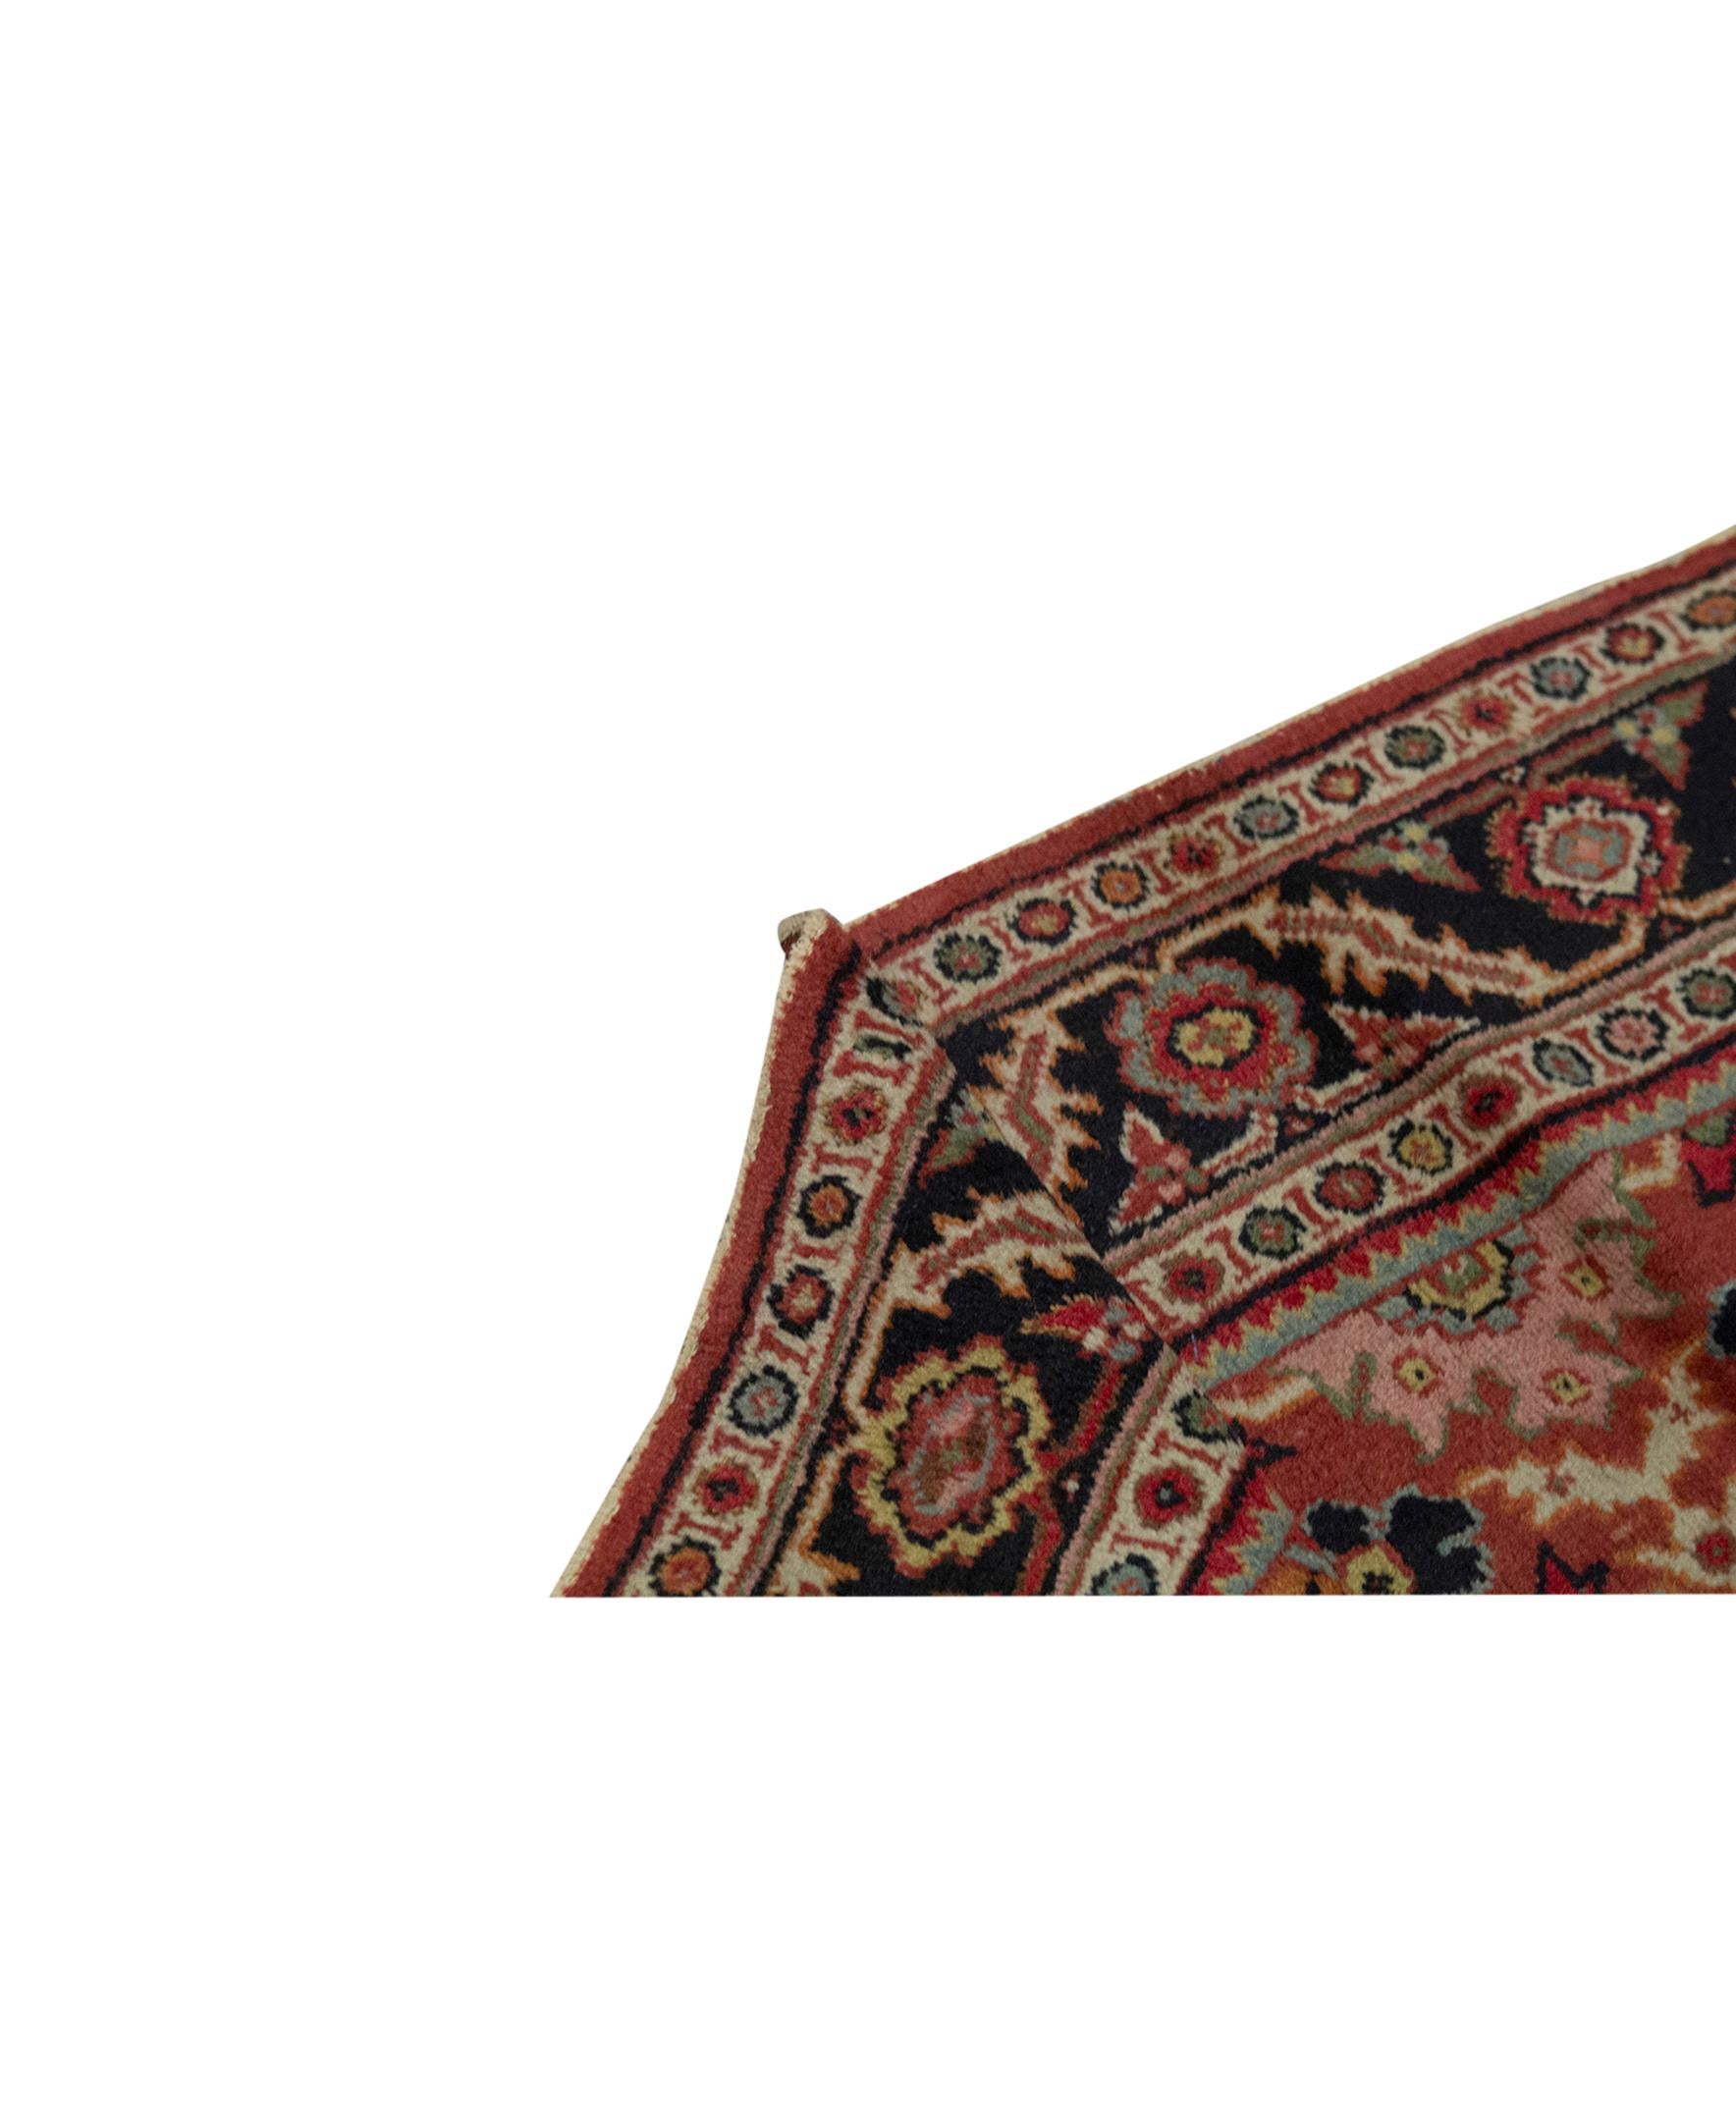 Hand-Woven Antique Persian Fine Traditional Handwoven Luxury Wool Red / Black Rug For Sale